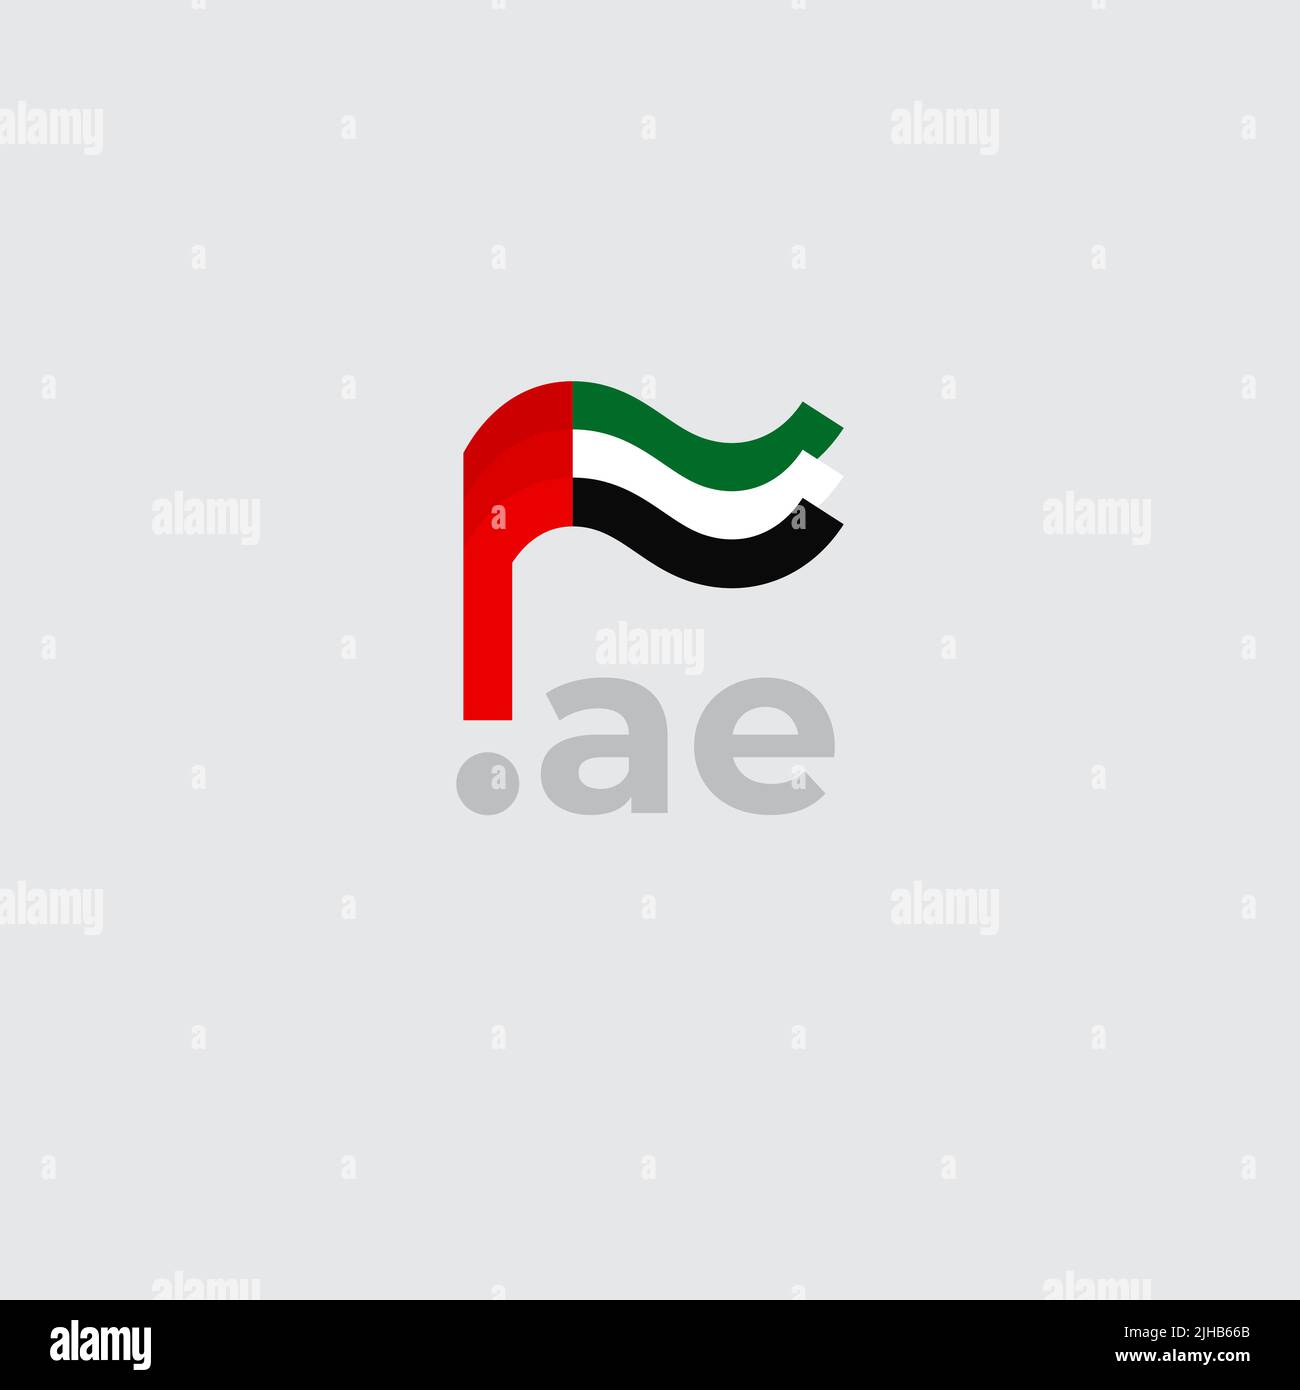 United arab emirates flag icon. Original simple design of the uae flag, map marker. Design element, template national poster with ae domain. State Stock Vector